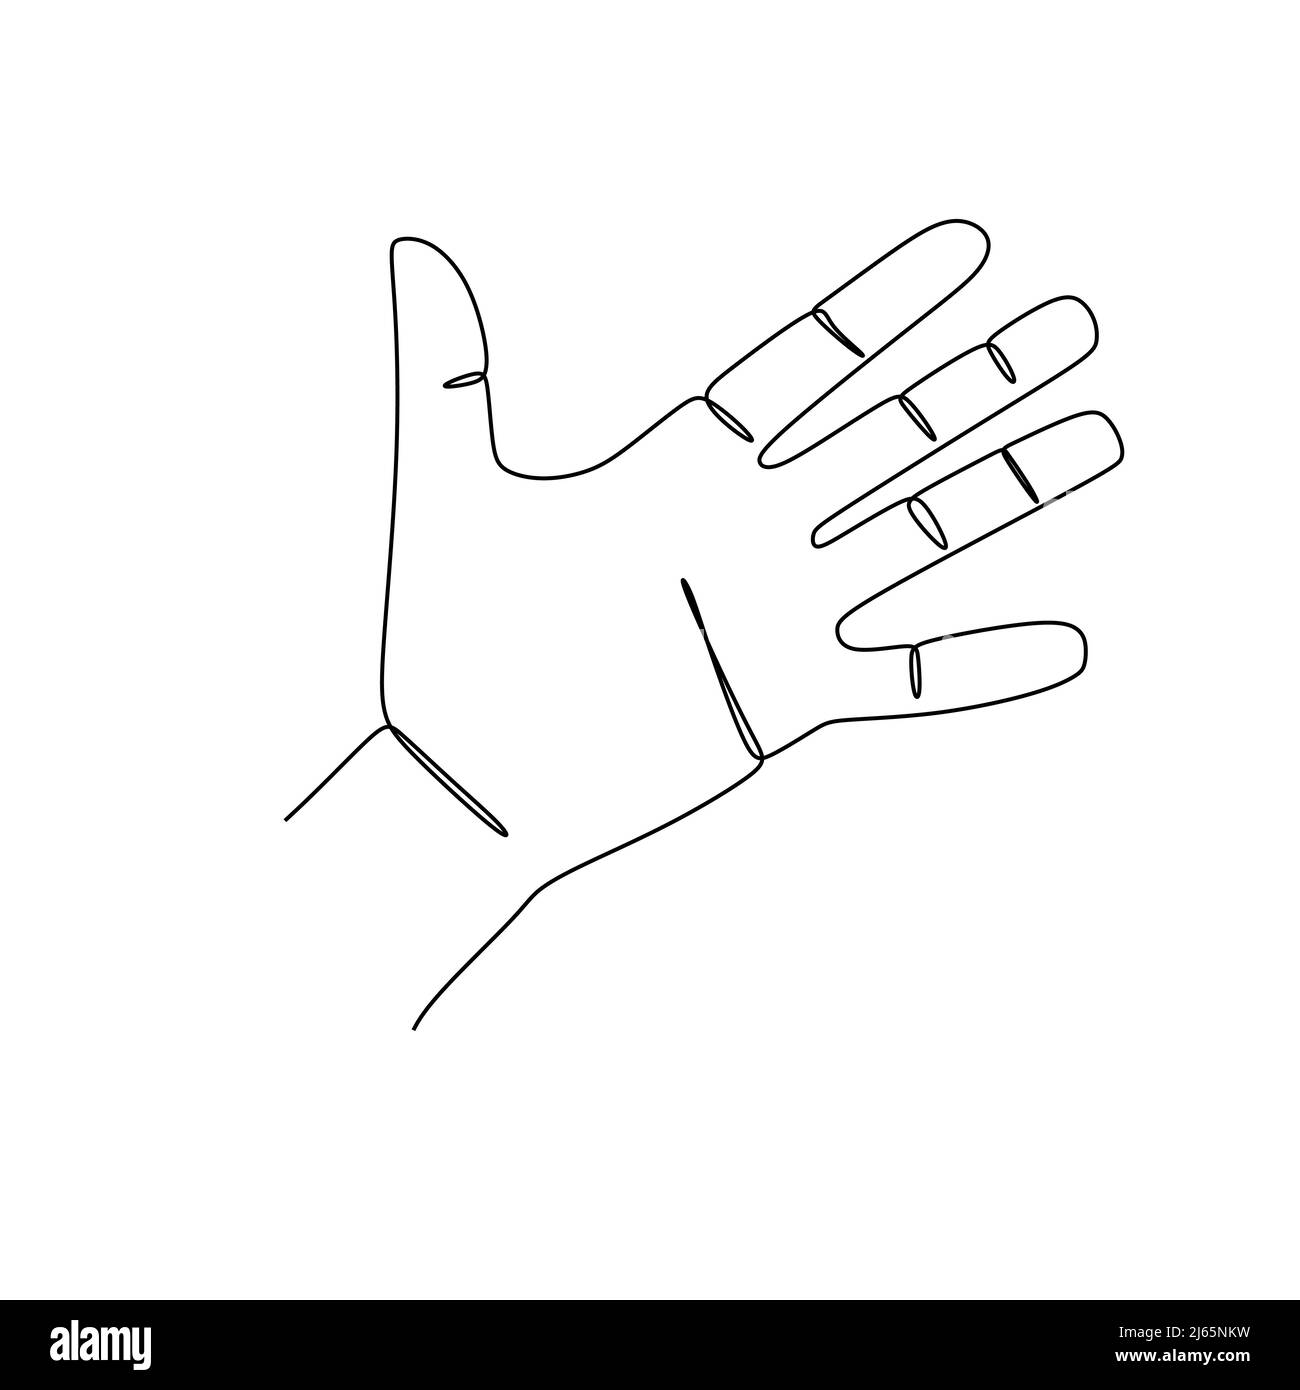 Wave Hand Gesture Single line drawing. Sign and symbol of hand gestures. Single continuous line drawing. Hand drawn style art doodle isolated on white Stock Vector